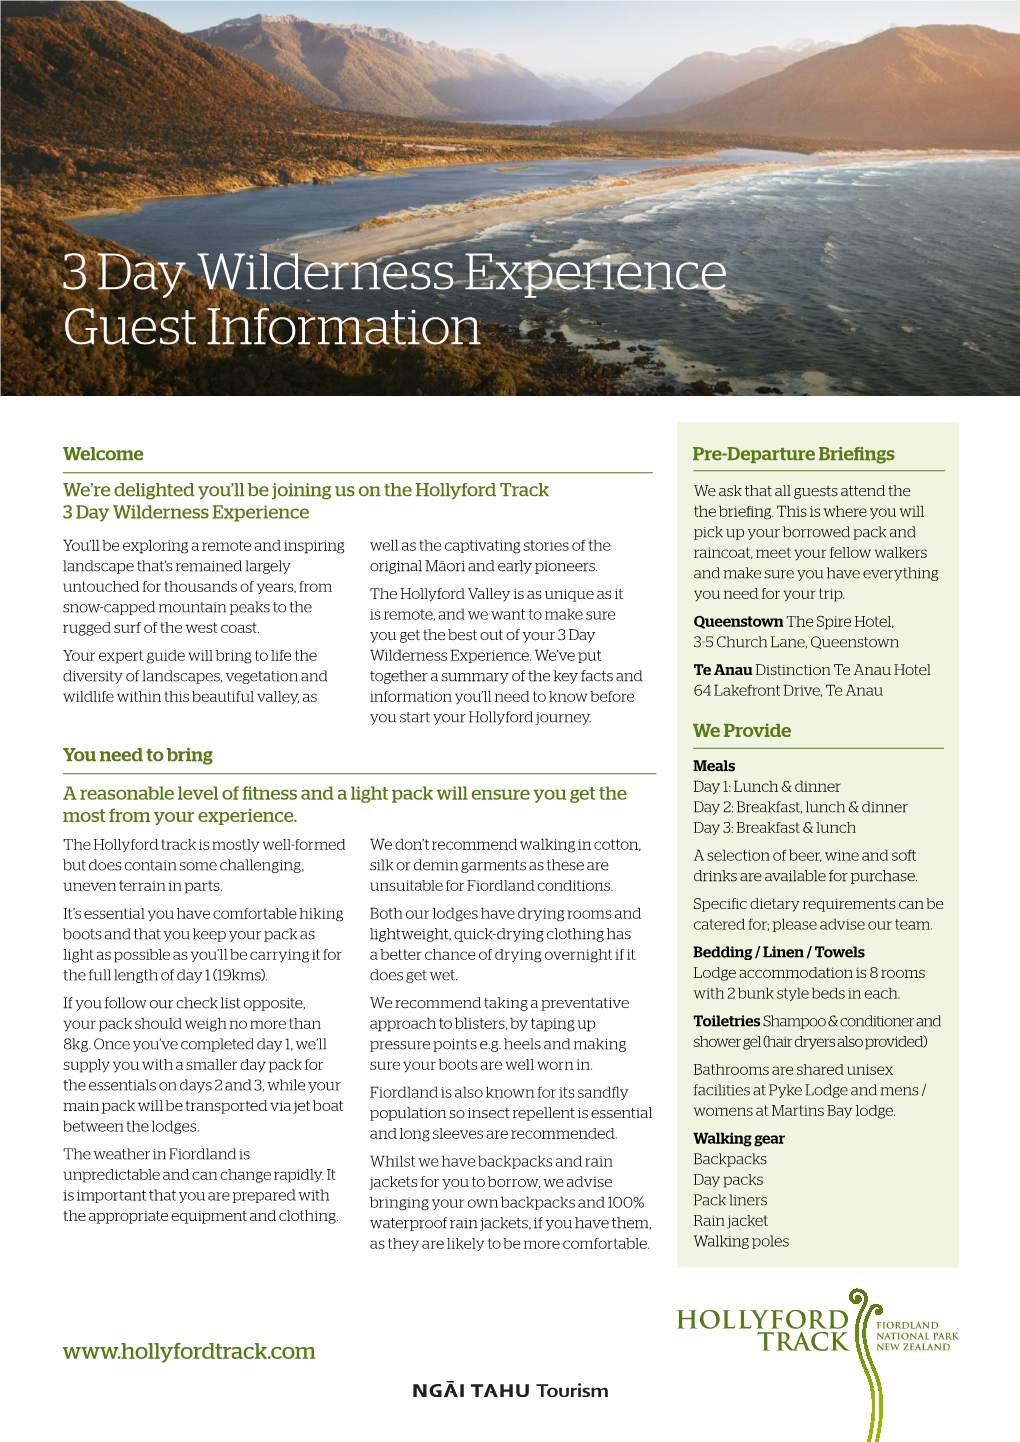 3 Day Wilderness Experience Guest Information